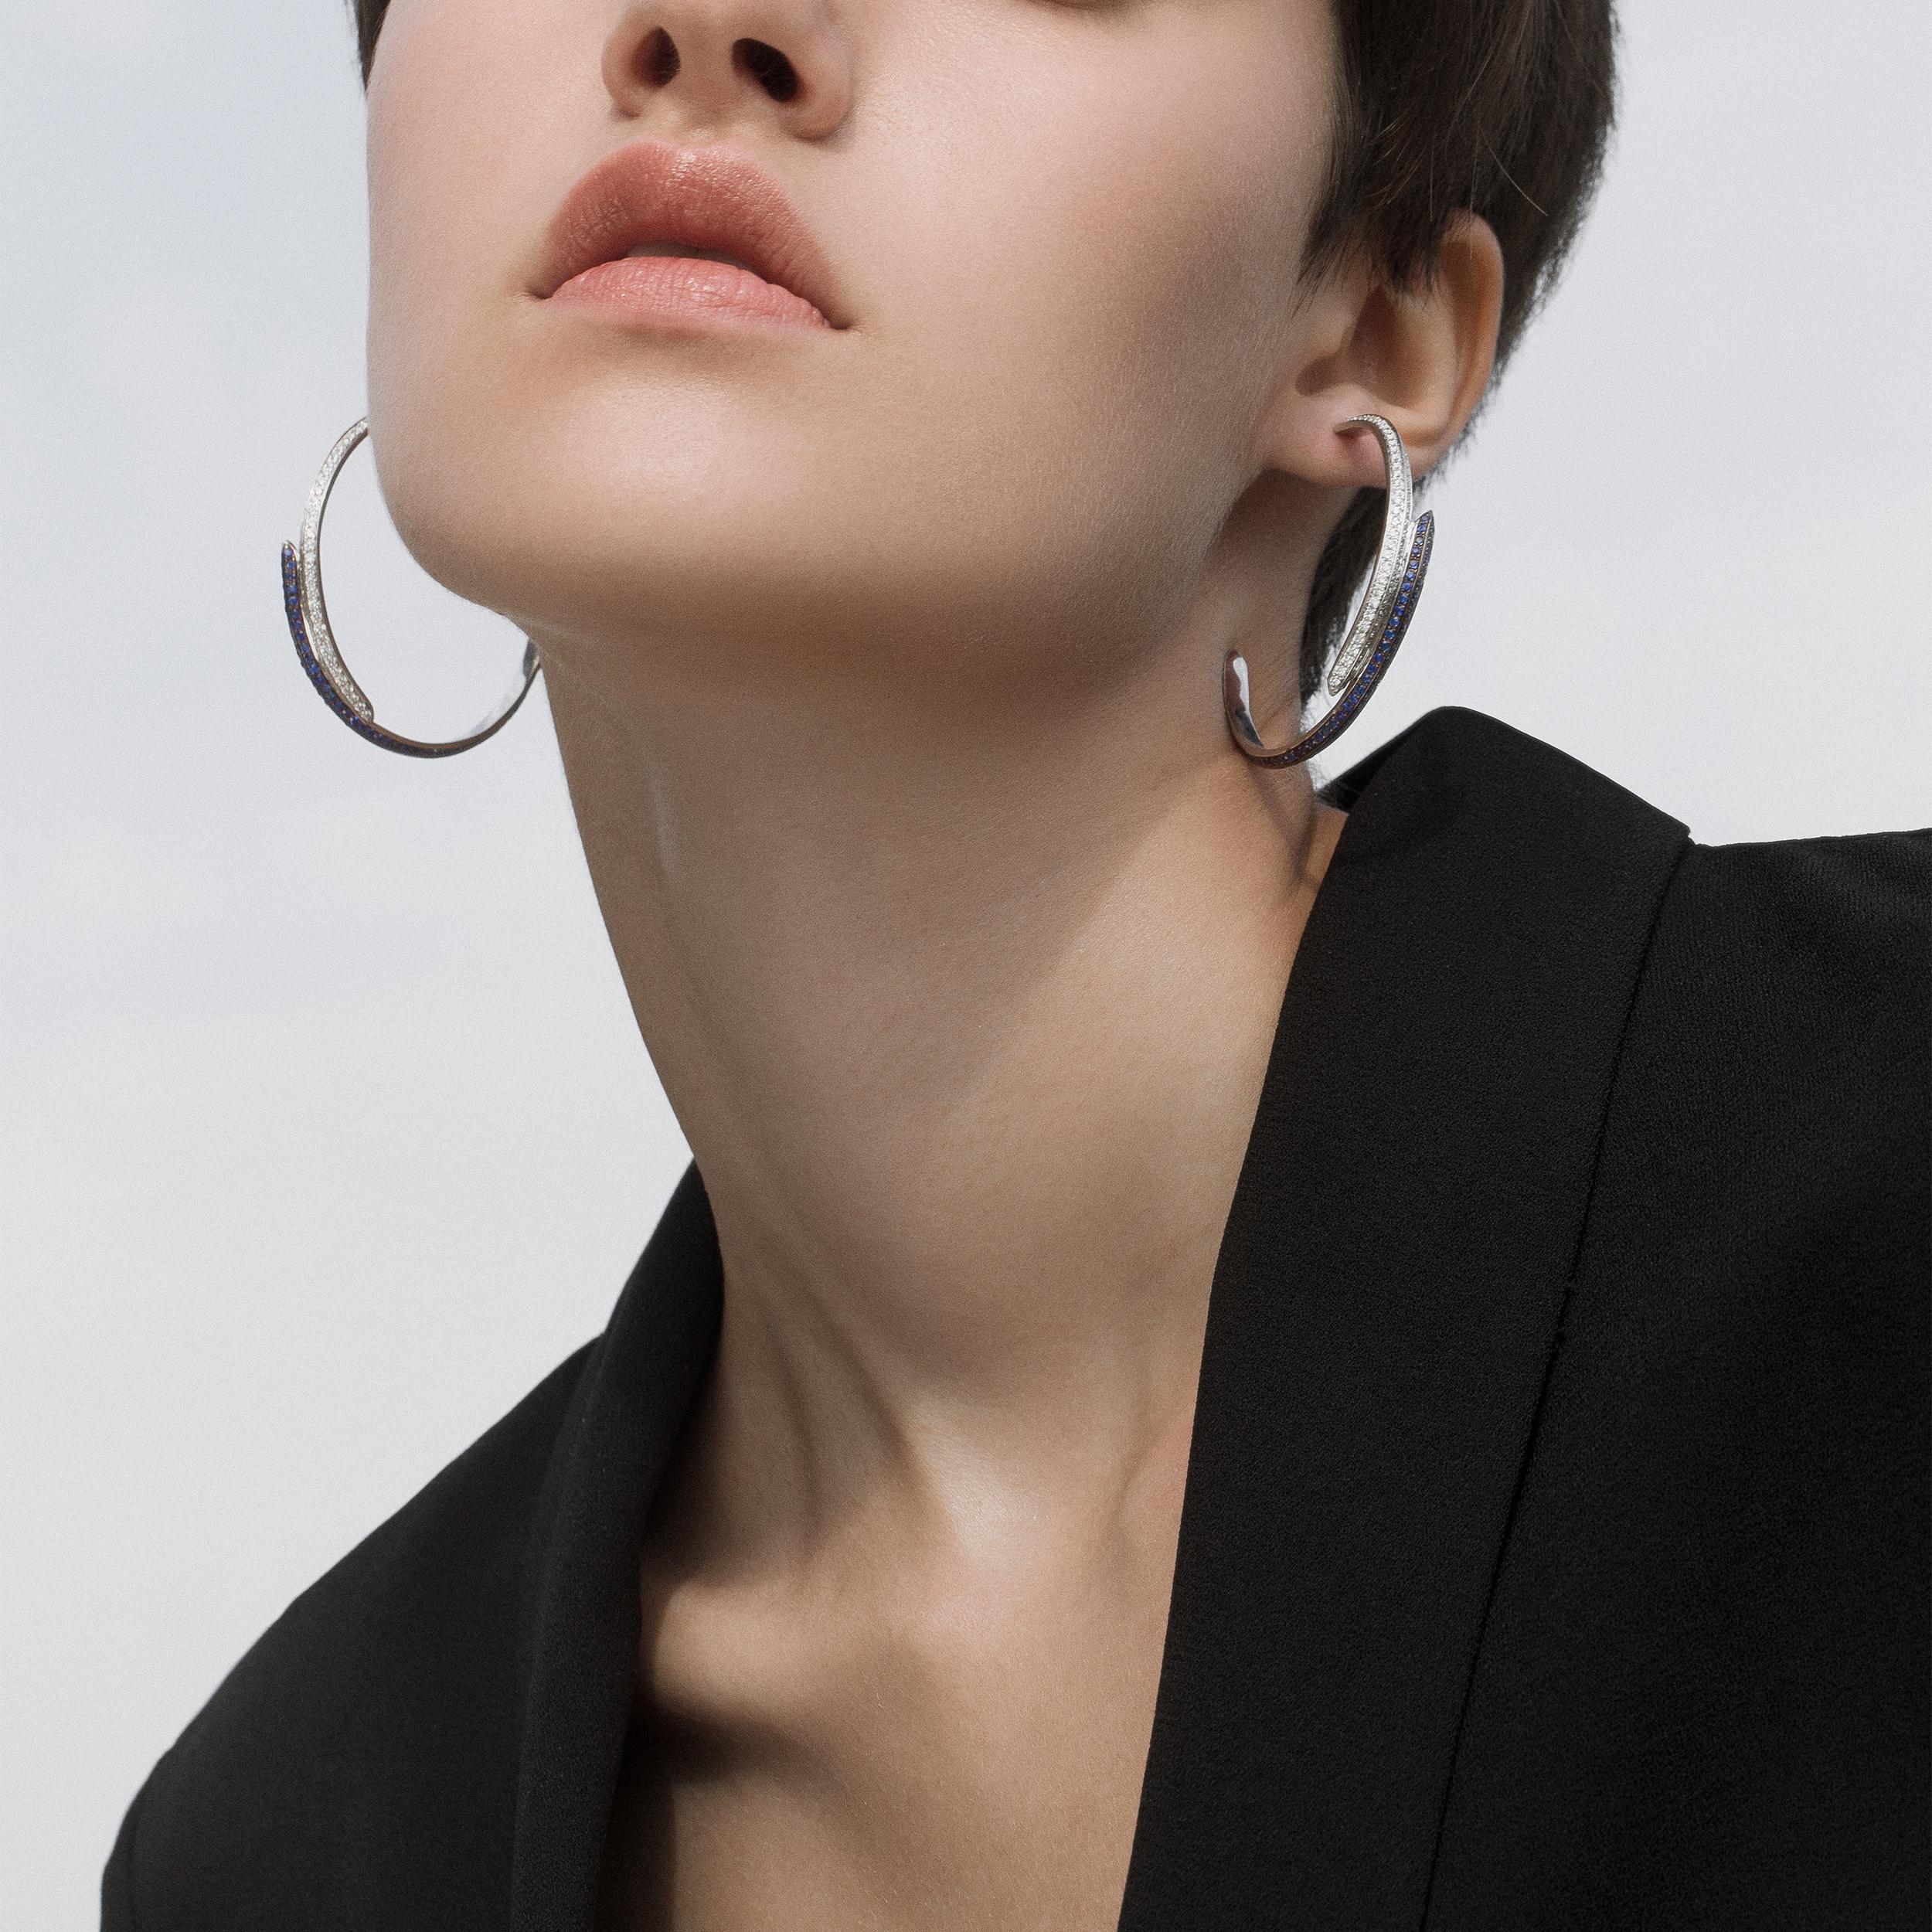 18kt white gold hoops with diamonds and sapphires from Ralph Masri's Modernist collection, inspired by mid-century Modernist architecture with an emphasis on minimalist shapes and silhouettes.

Available in yellow, rose or white gold.

Push backs